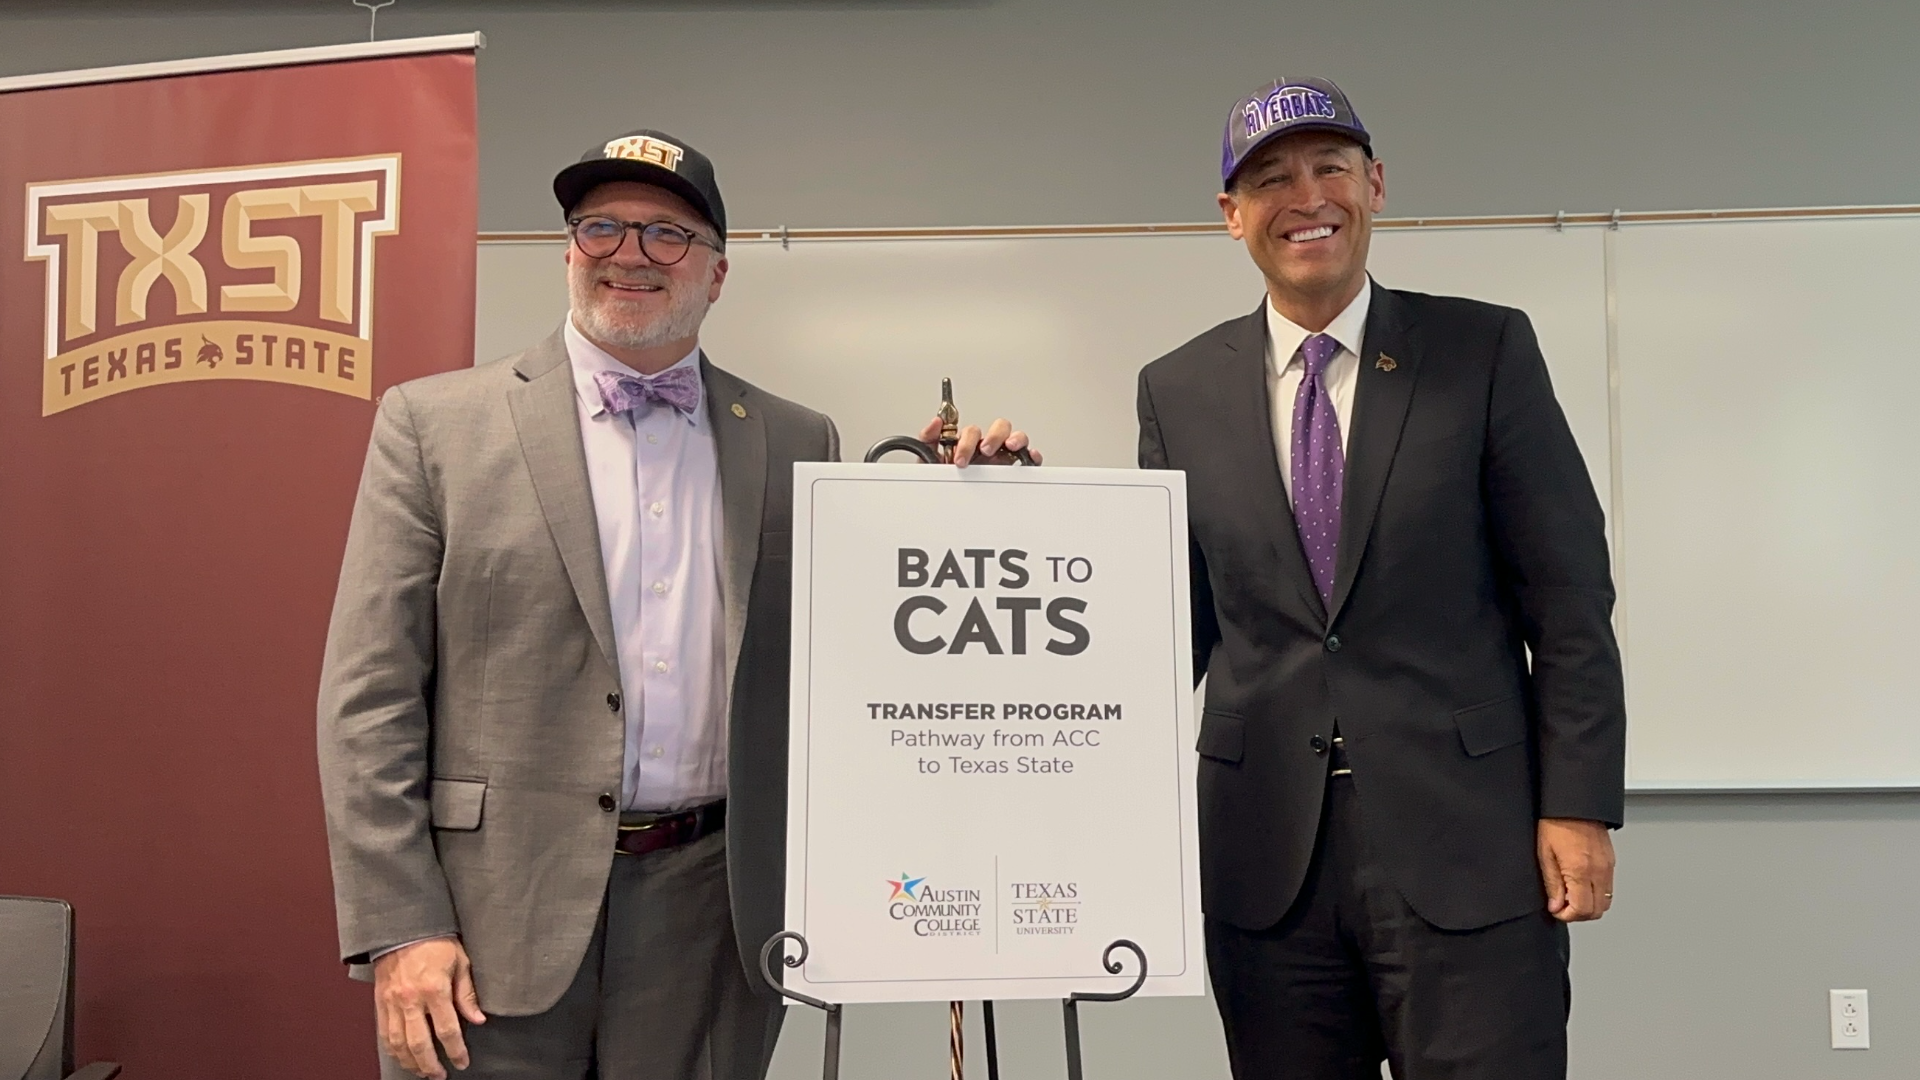 Through their "Bats to Cats" partnership ACC and Texas State University are making it easier for students to transfer from the college to the university.